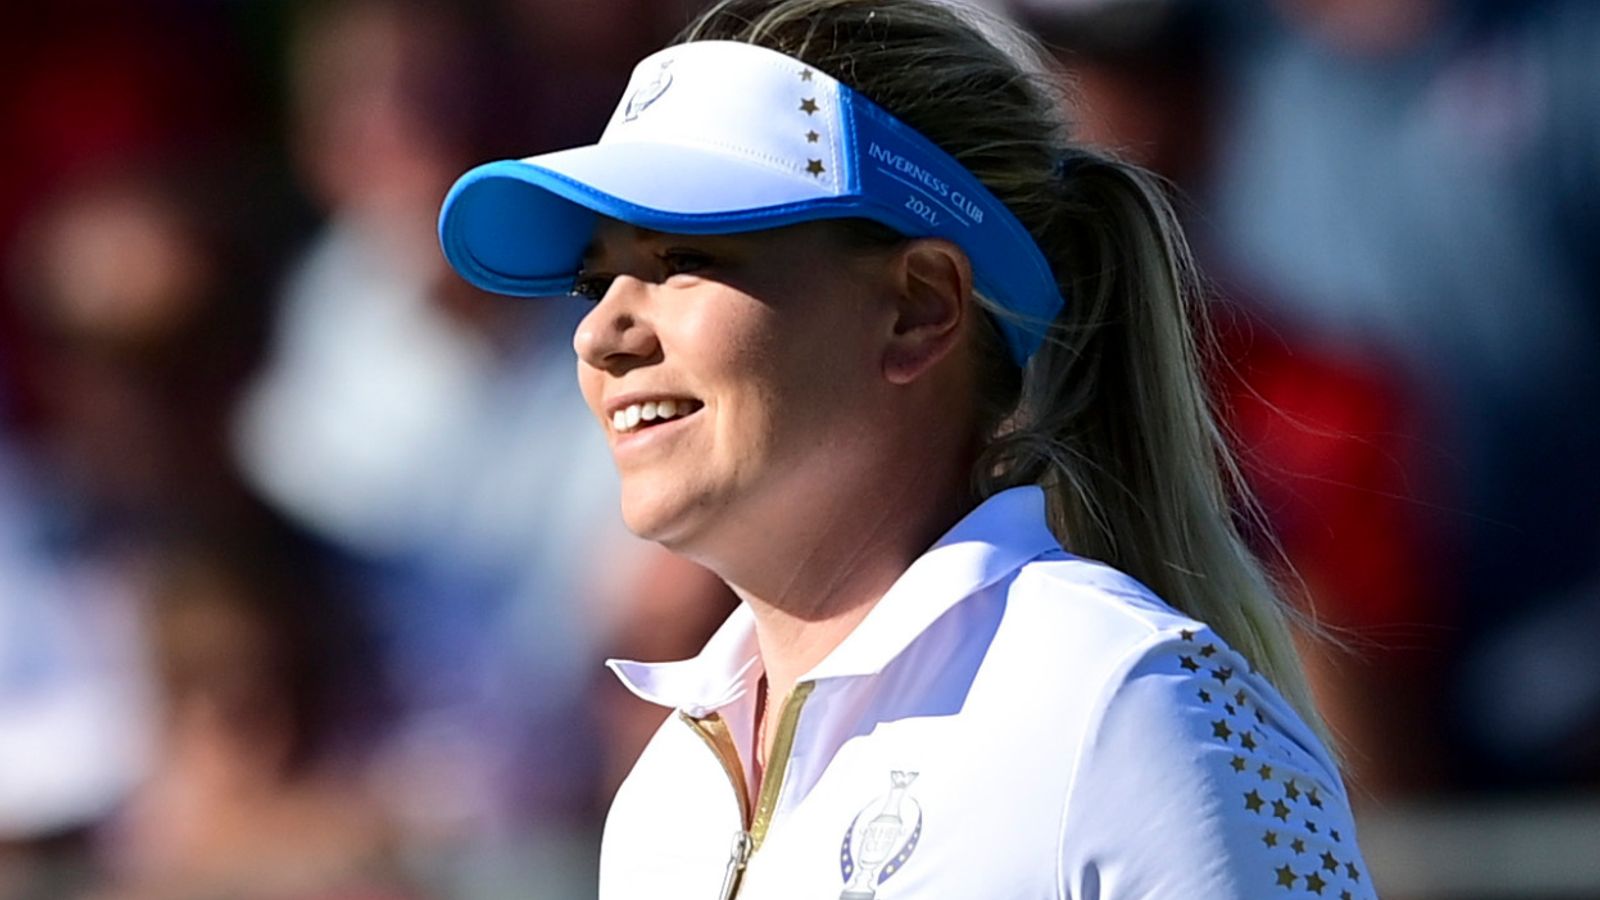 Solheim Cup singles Matchbymatch review as Team Europe claimed